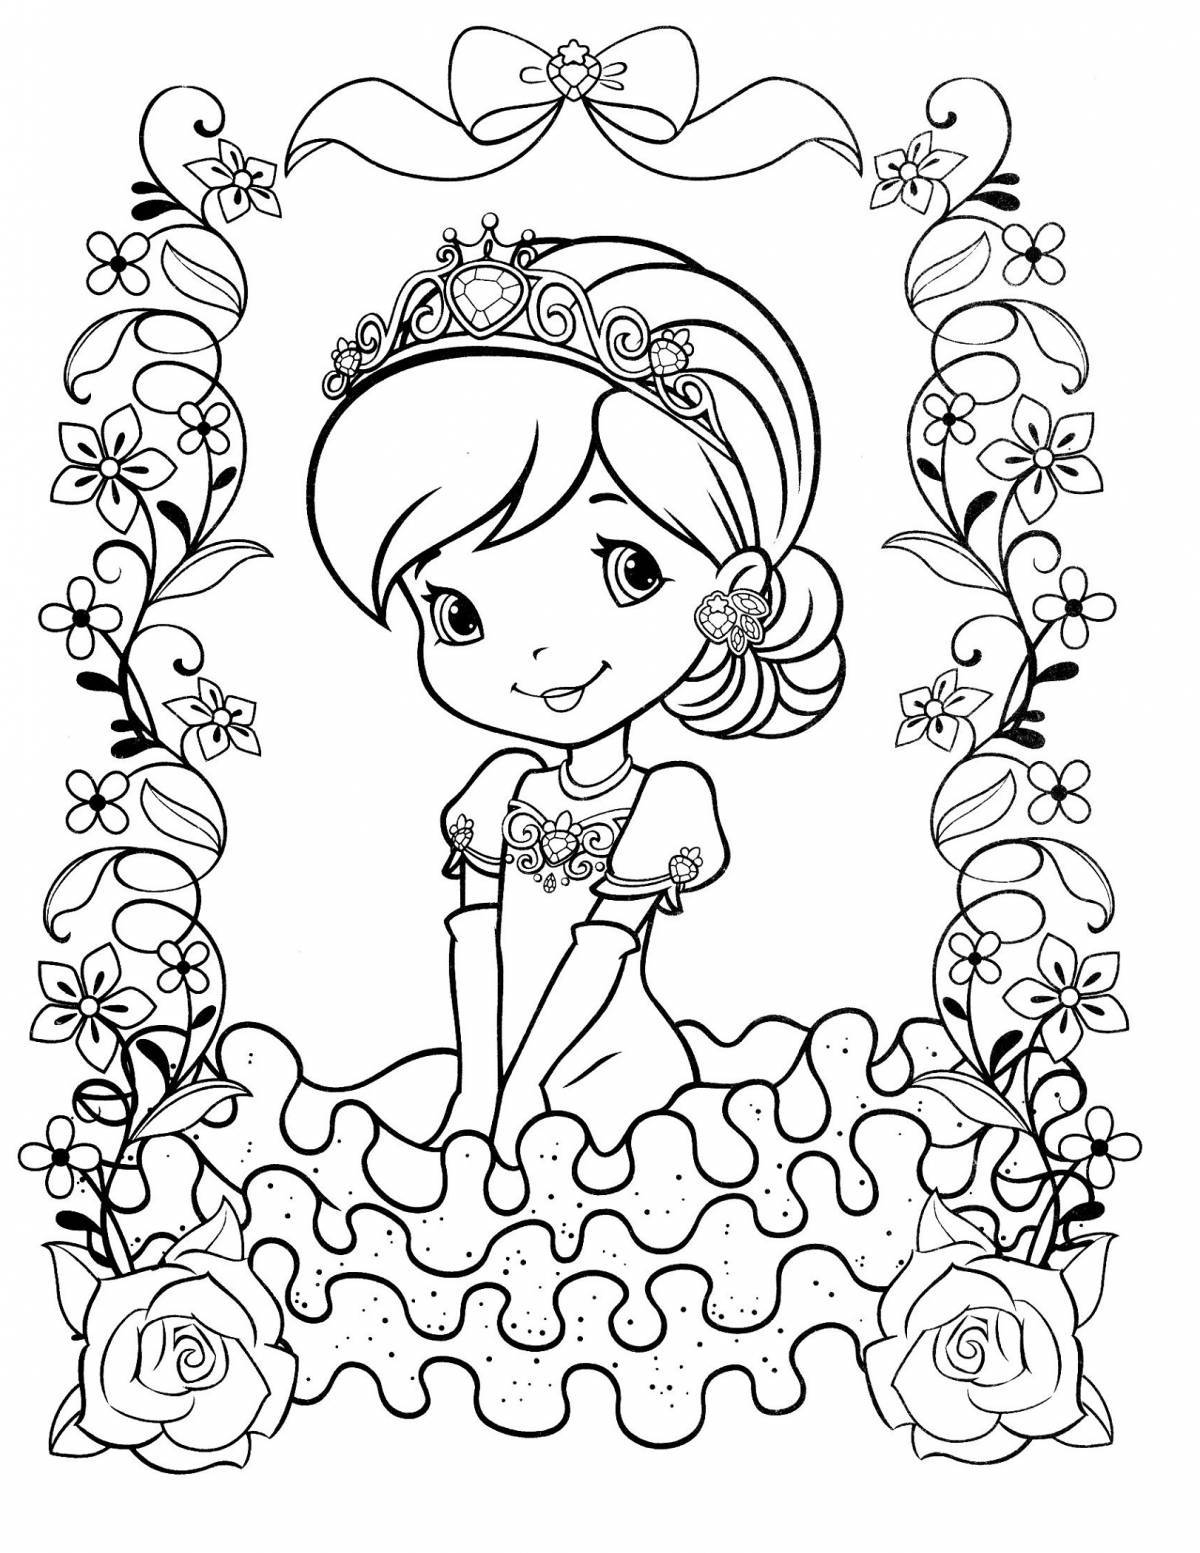 Majestic coloring book for children 6-7 years old princess